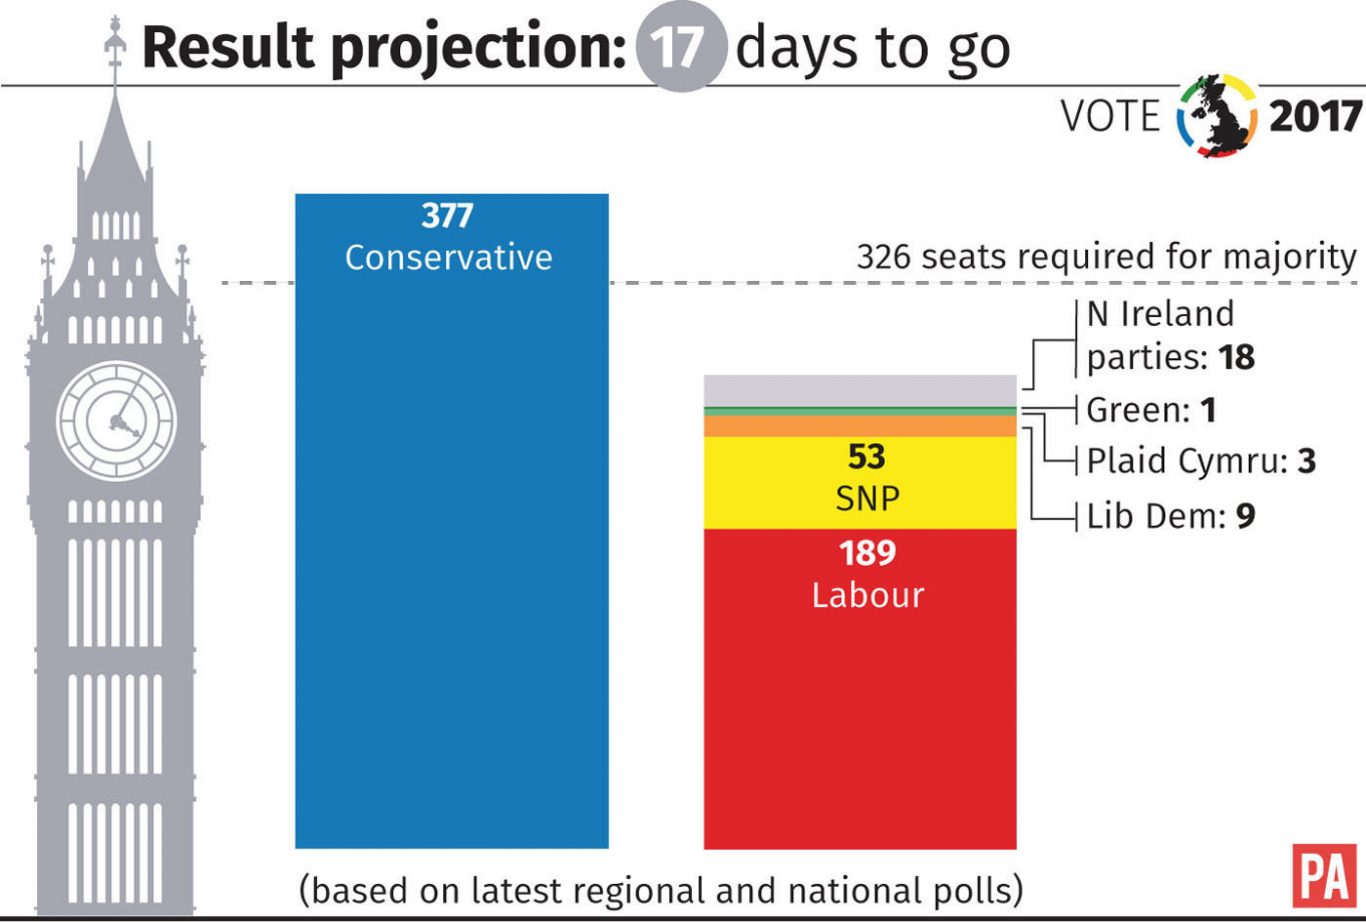 Result projection based on latest regional and national polls graphic